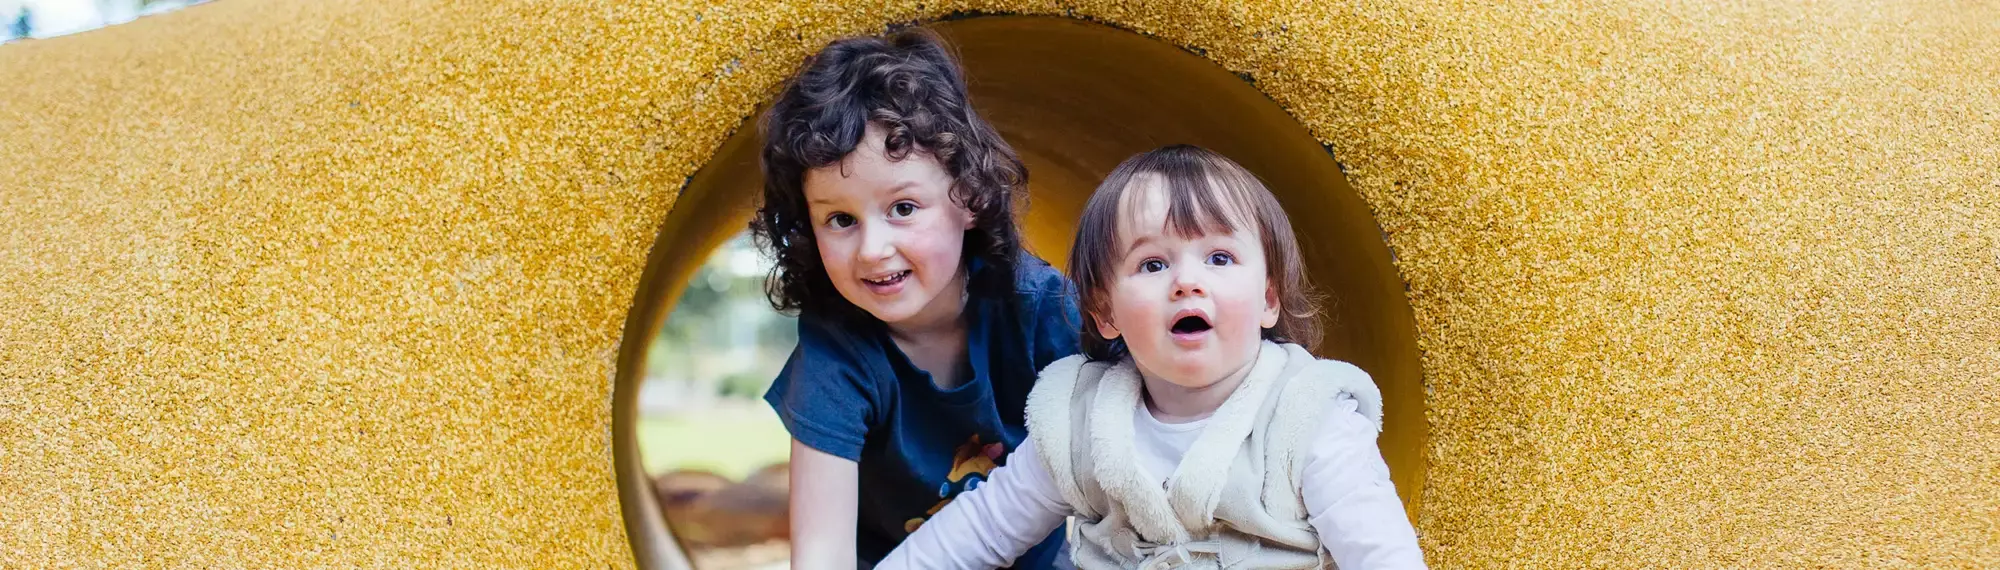 Two children crawling in a yellow tunnel, looking at the camera.